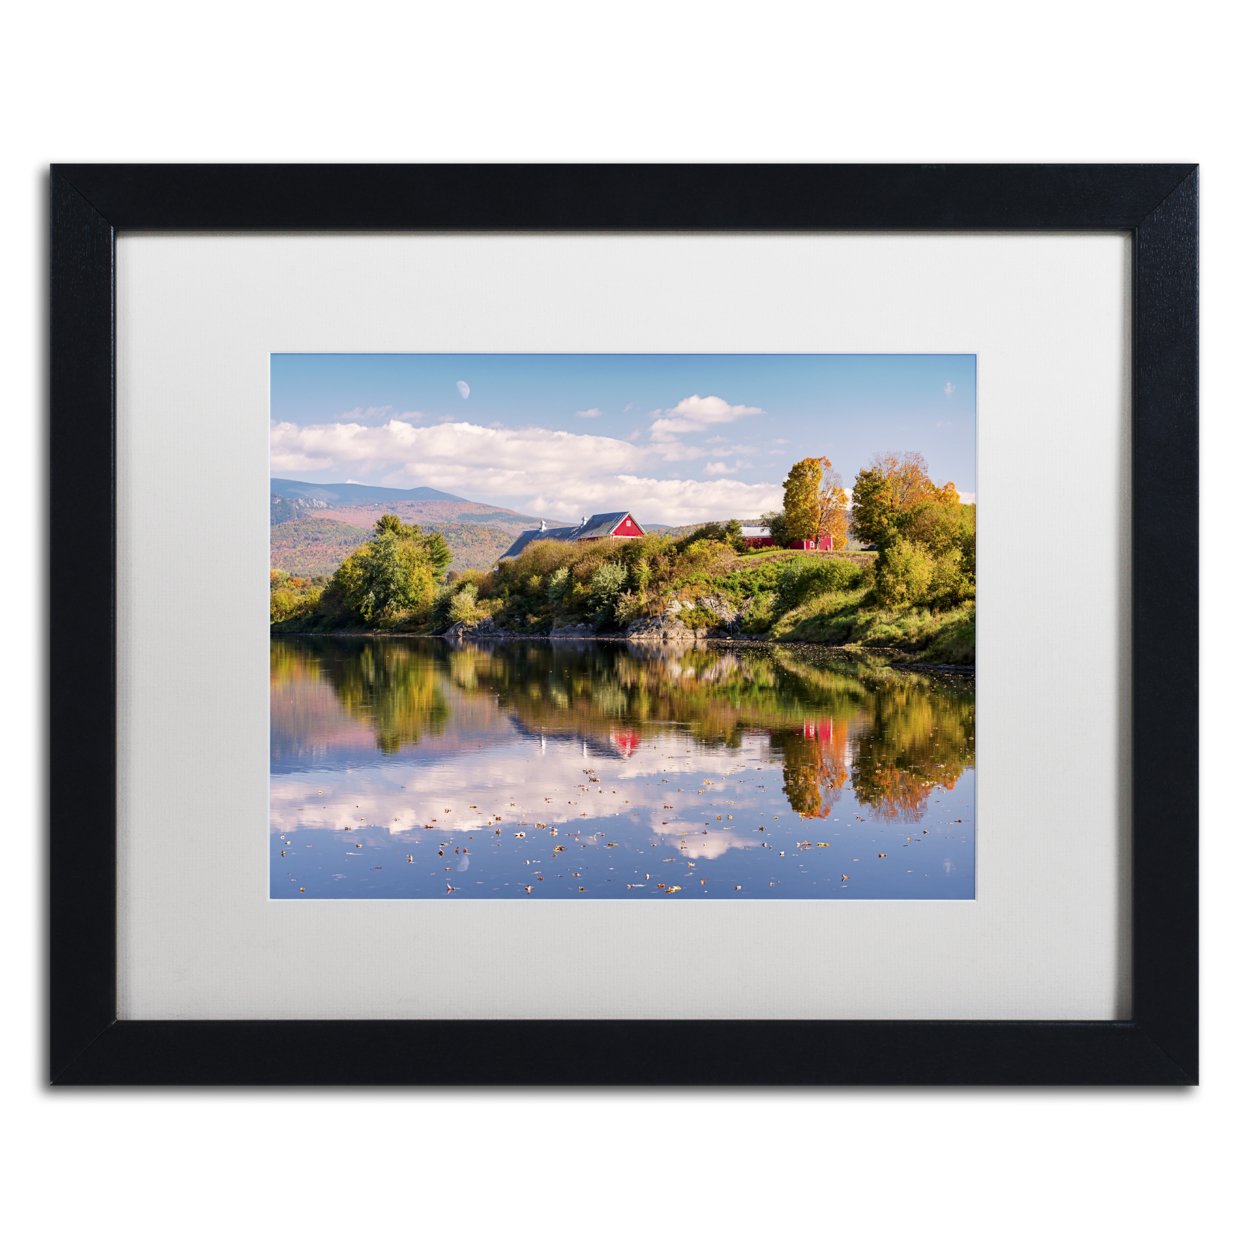 Michael Blanchette Photography 'Pastoral Reflection' Black Wooden Framed Art 18 X 22 Inches